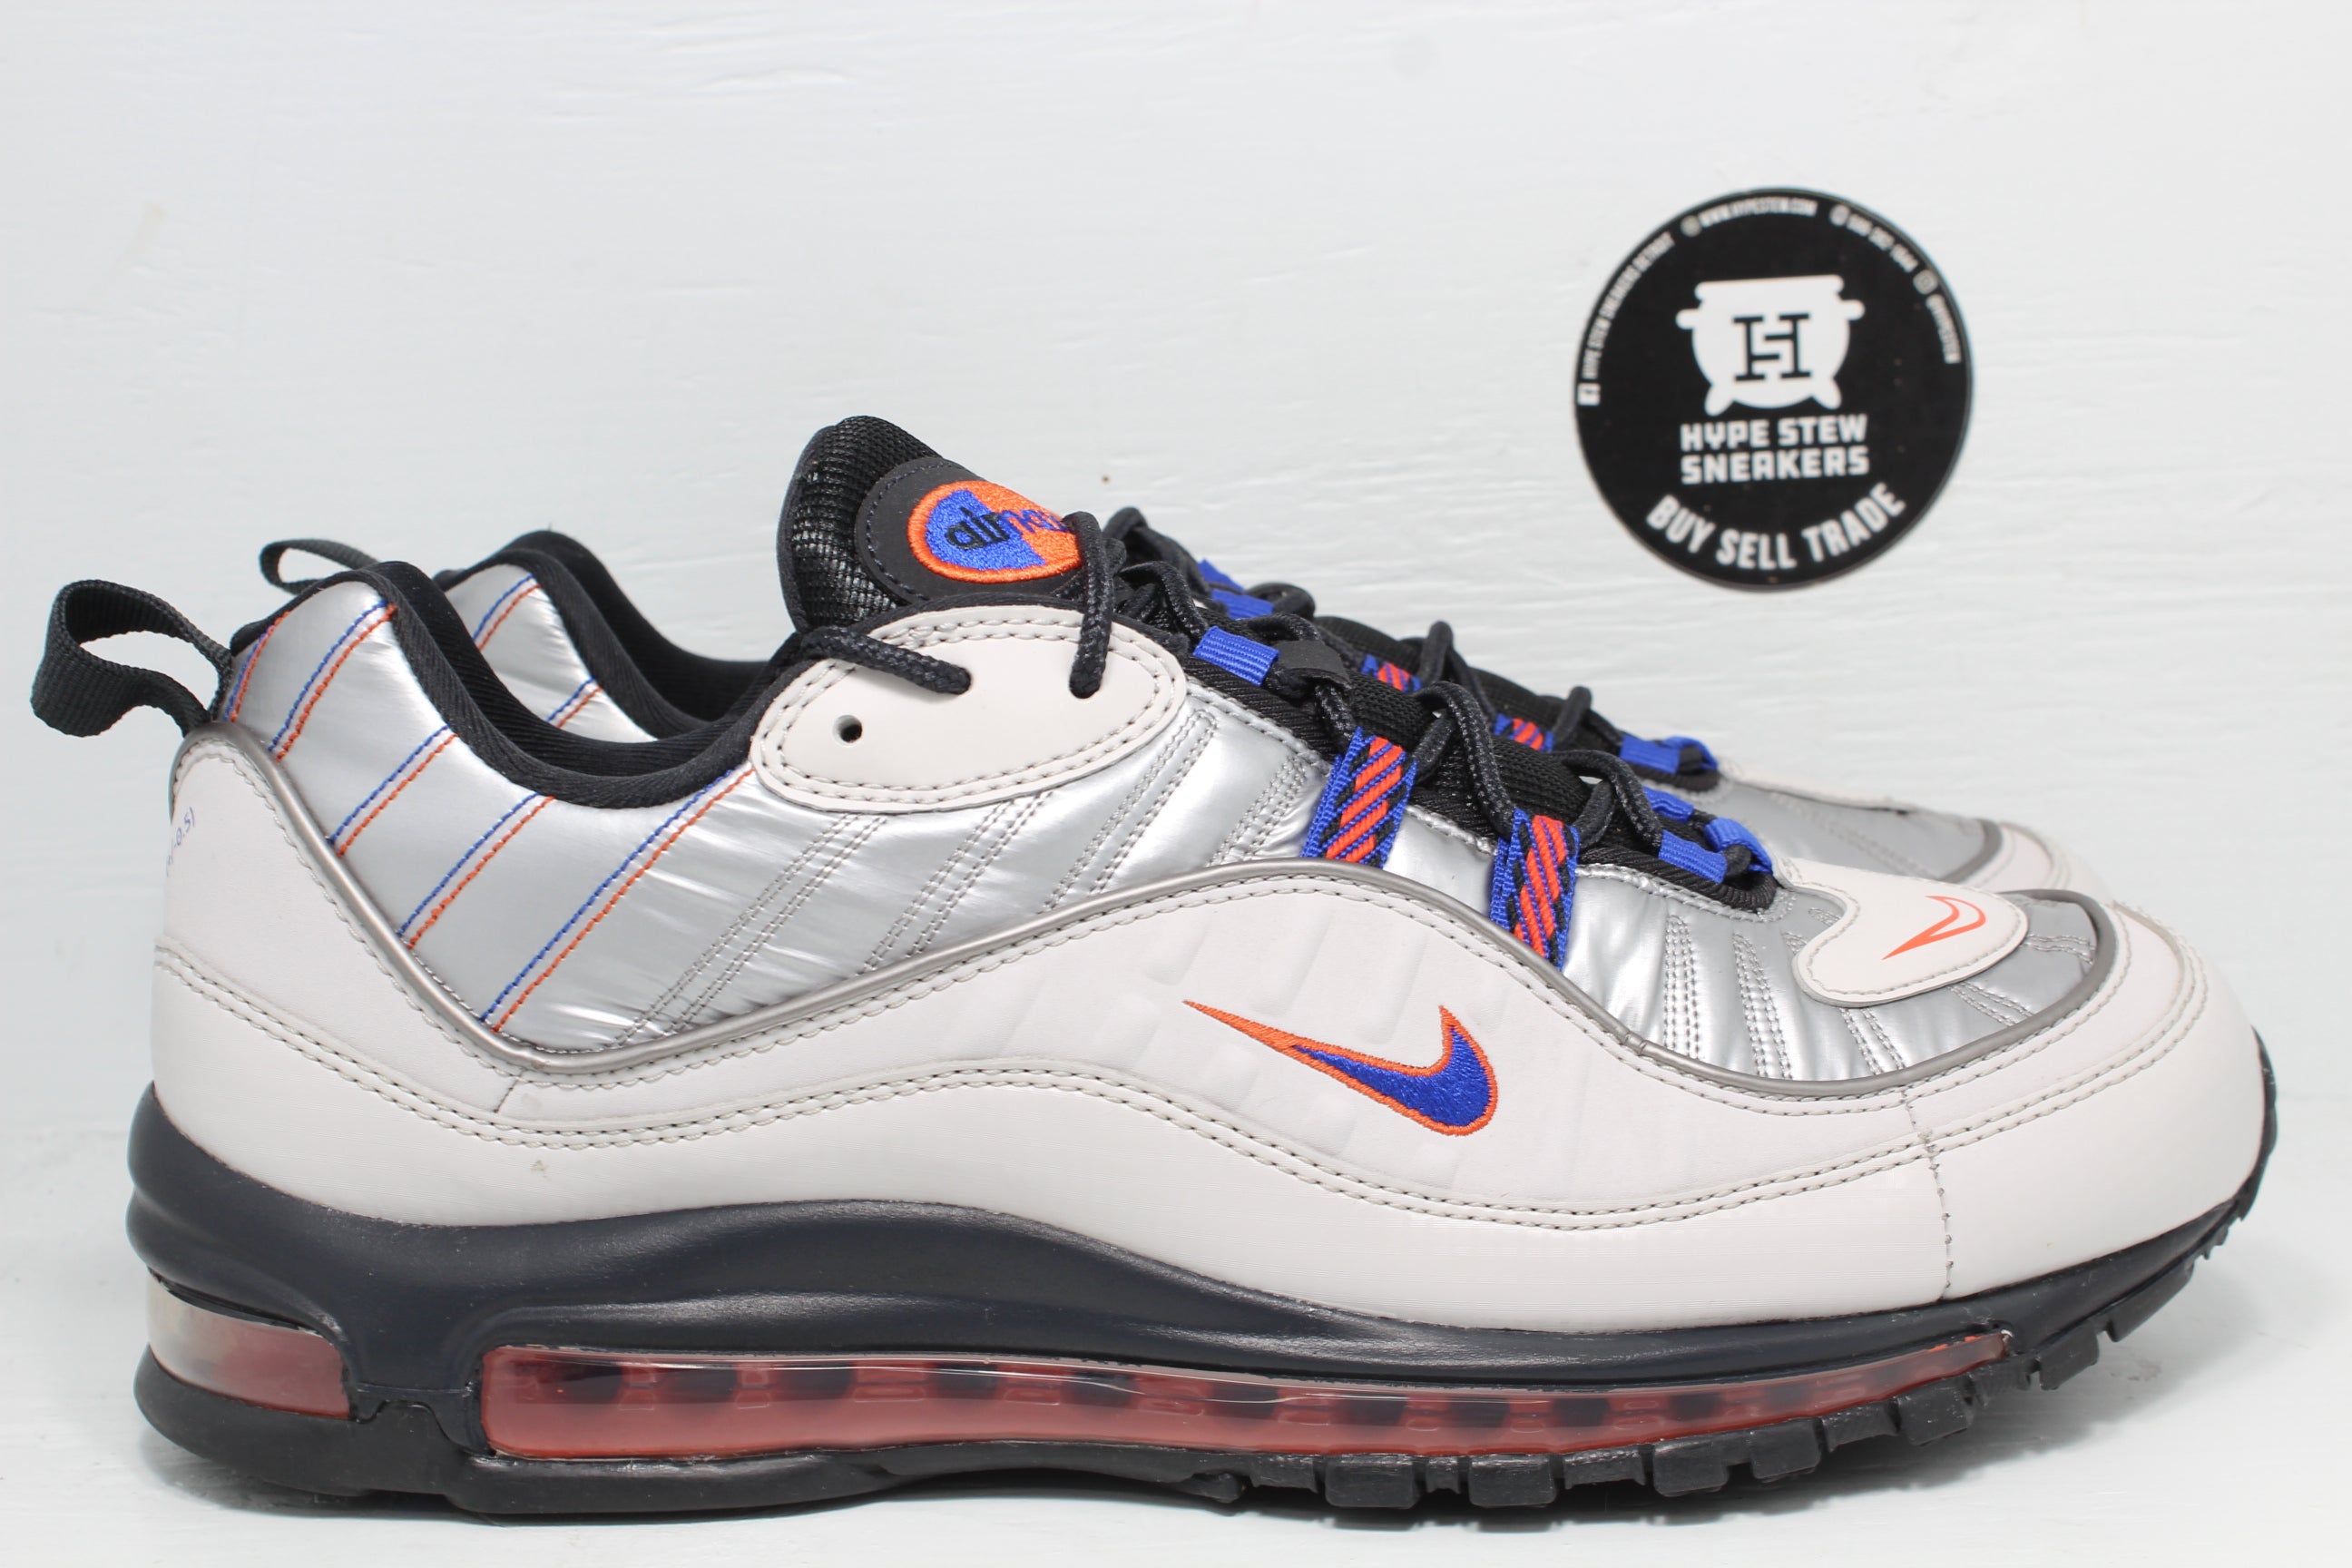 Nike Air Max Space Suit | Hype Stew